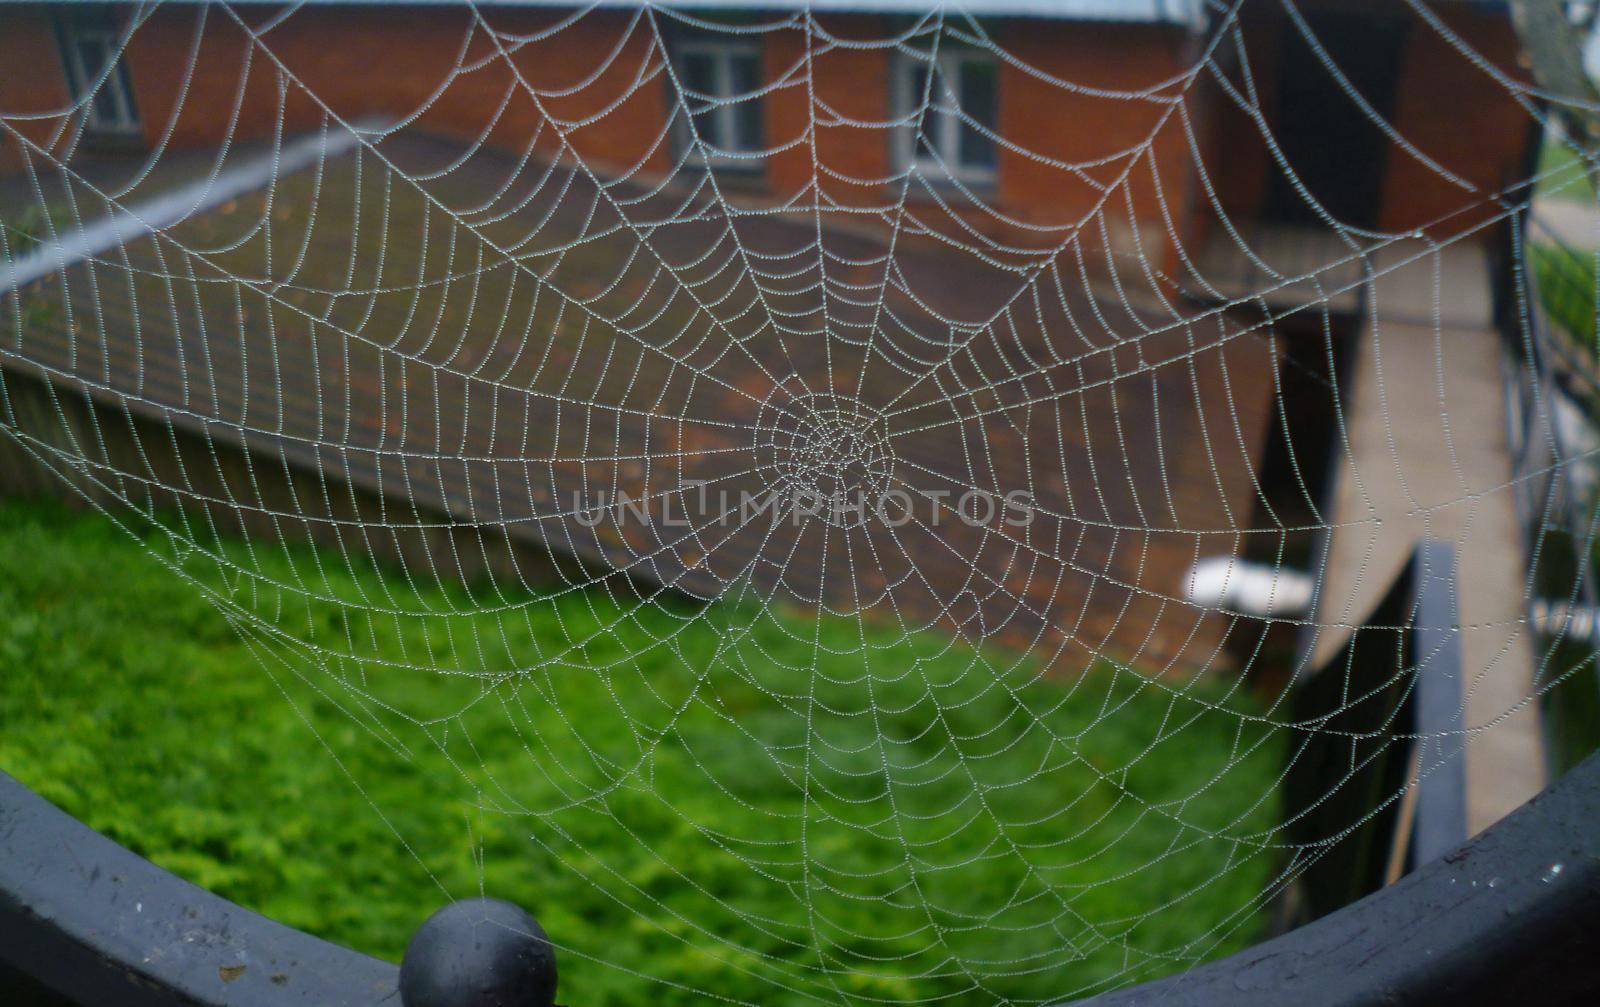 Morning dew on a spider web shows beautifully built web structure